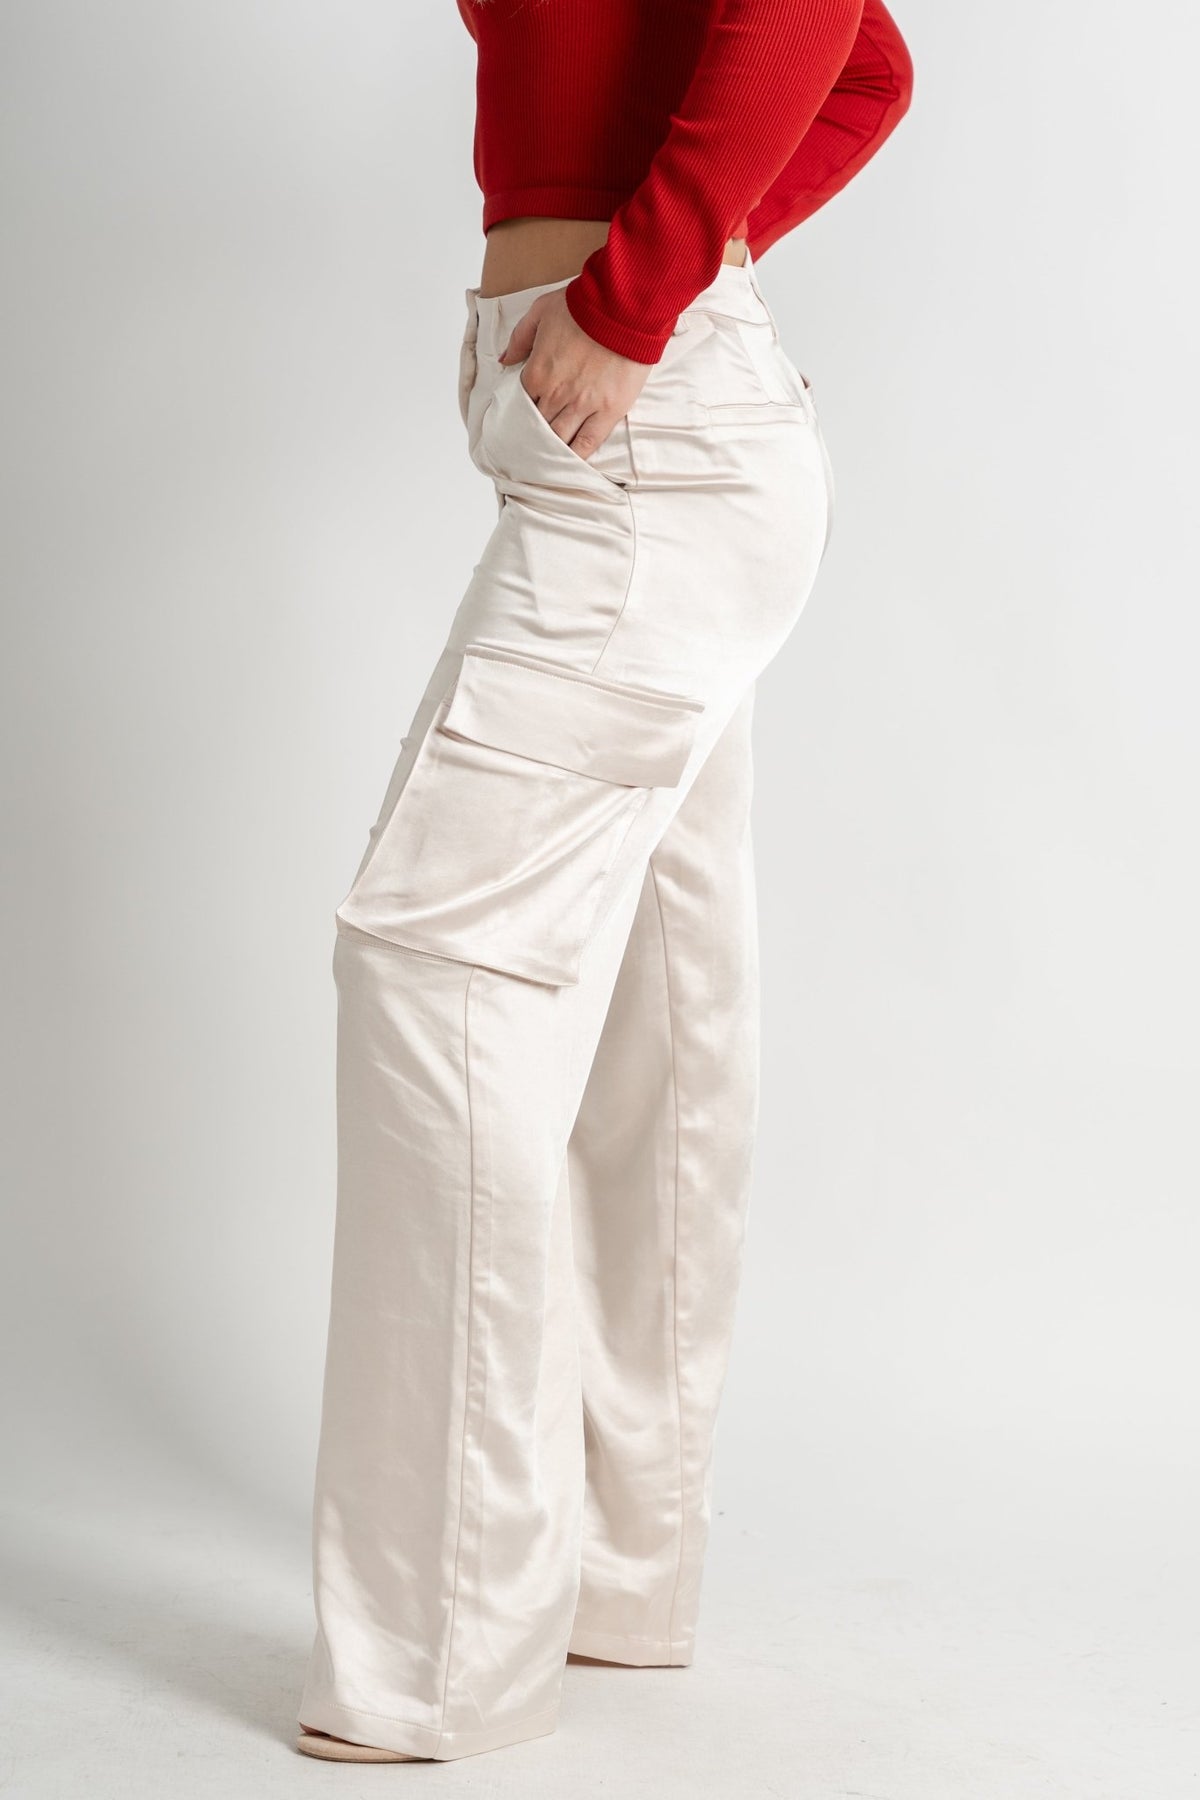 Myra satin cargo pants pearl - Trendy T-Shirts for Valentine's Day at Lush Fashion Lounge Boutique in Oklahoma City